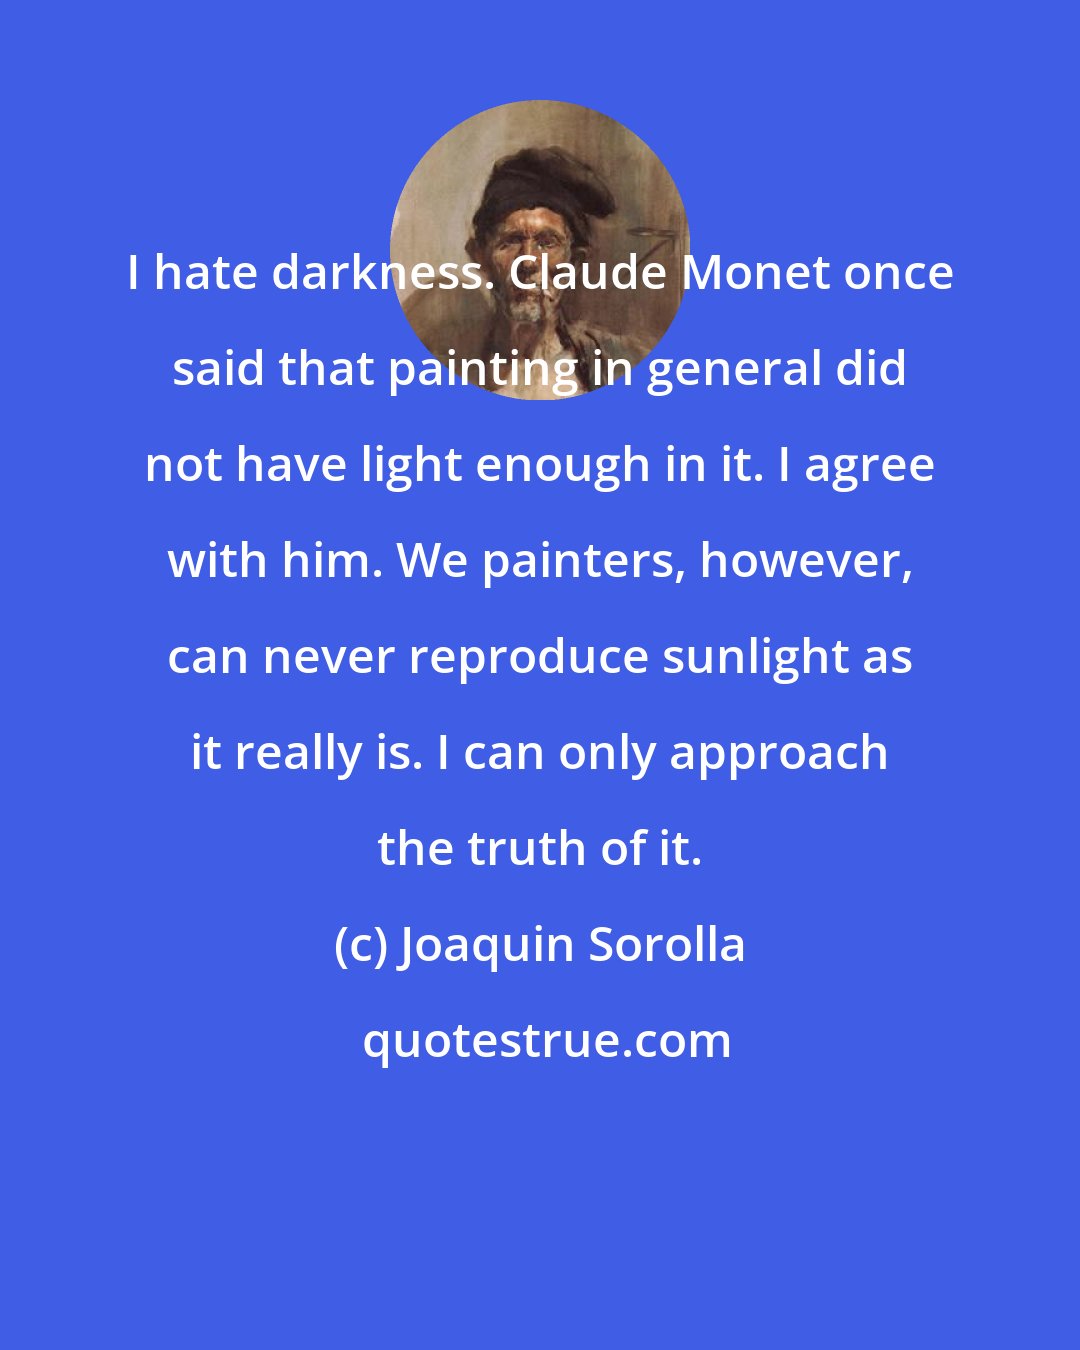 Joaquin Sorolla: I hate darkness. Claude Monet once said that painting in general did not have light enough in it. I agree with him. We painters, however, can never reproduce sunlight as it really is. I can only approach the truth of it.